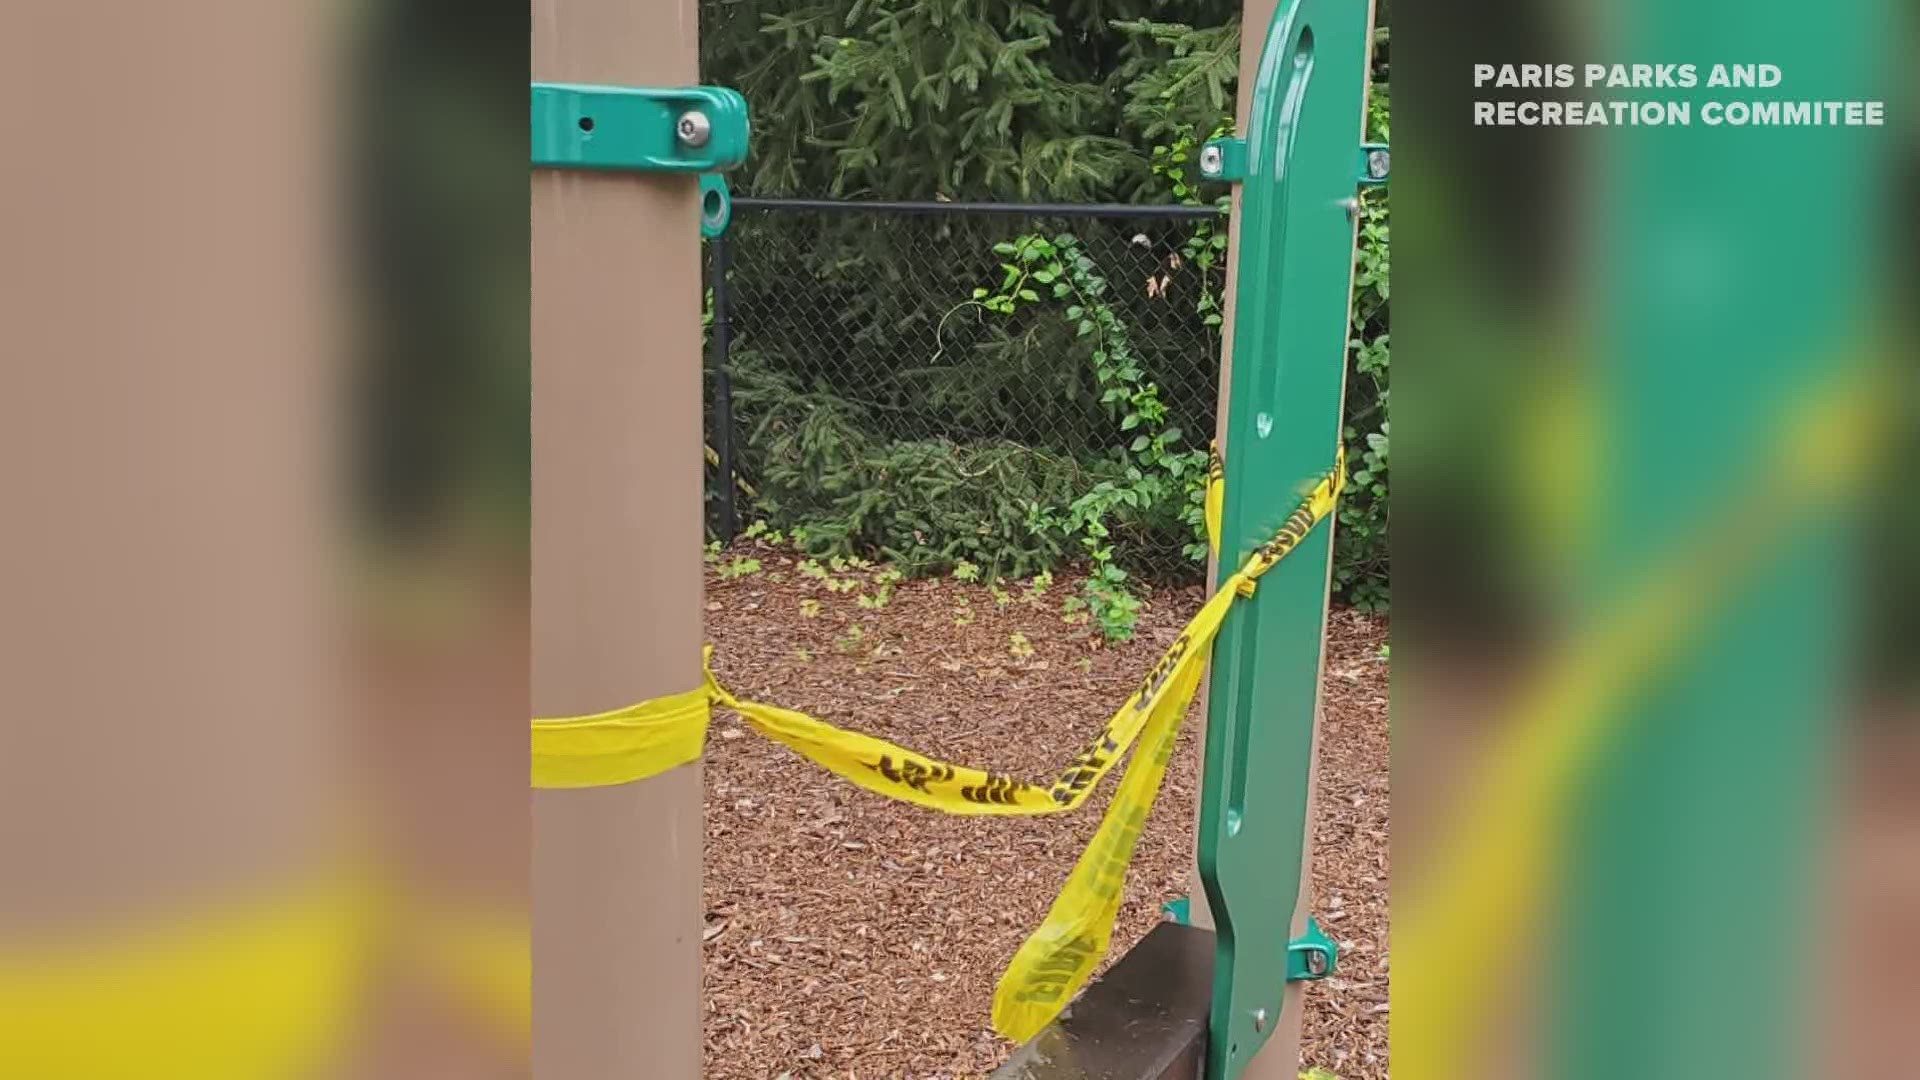 The Paris Police Department posted on their Facebook page that alleged vandals broke additional playground toys and broke locks sometime this past Saturday